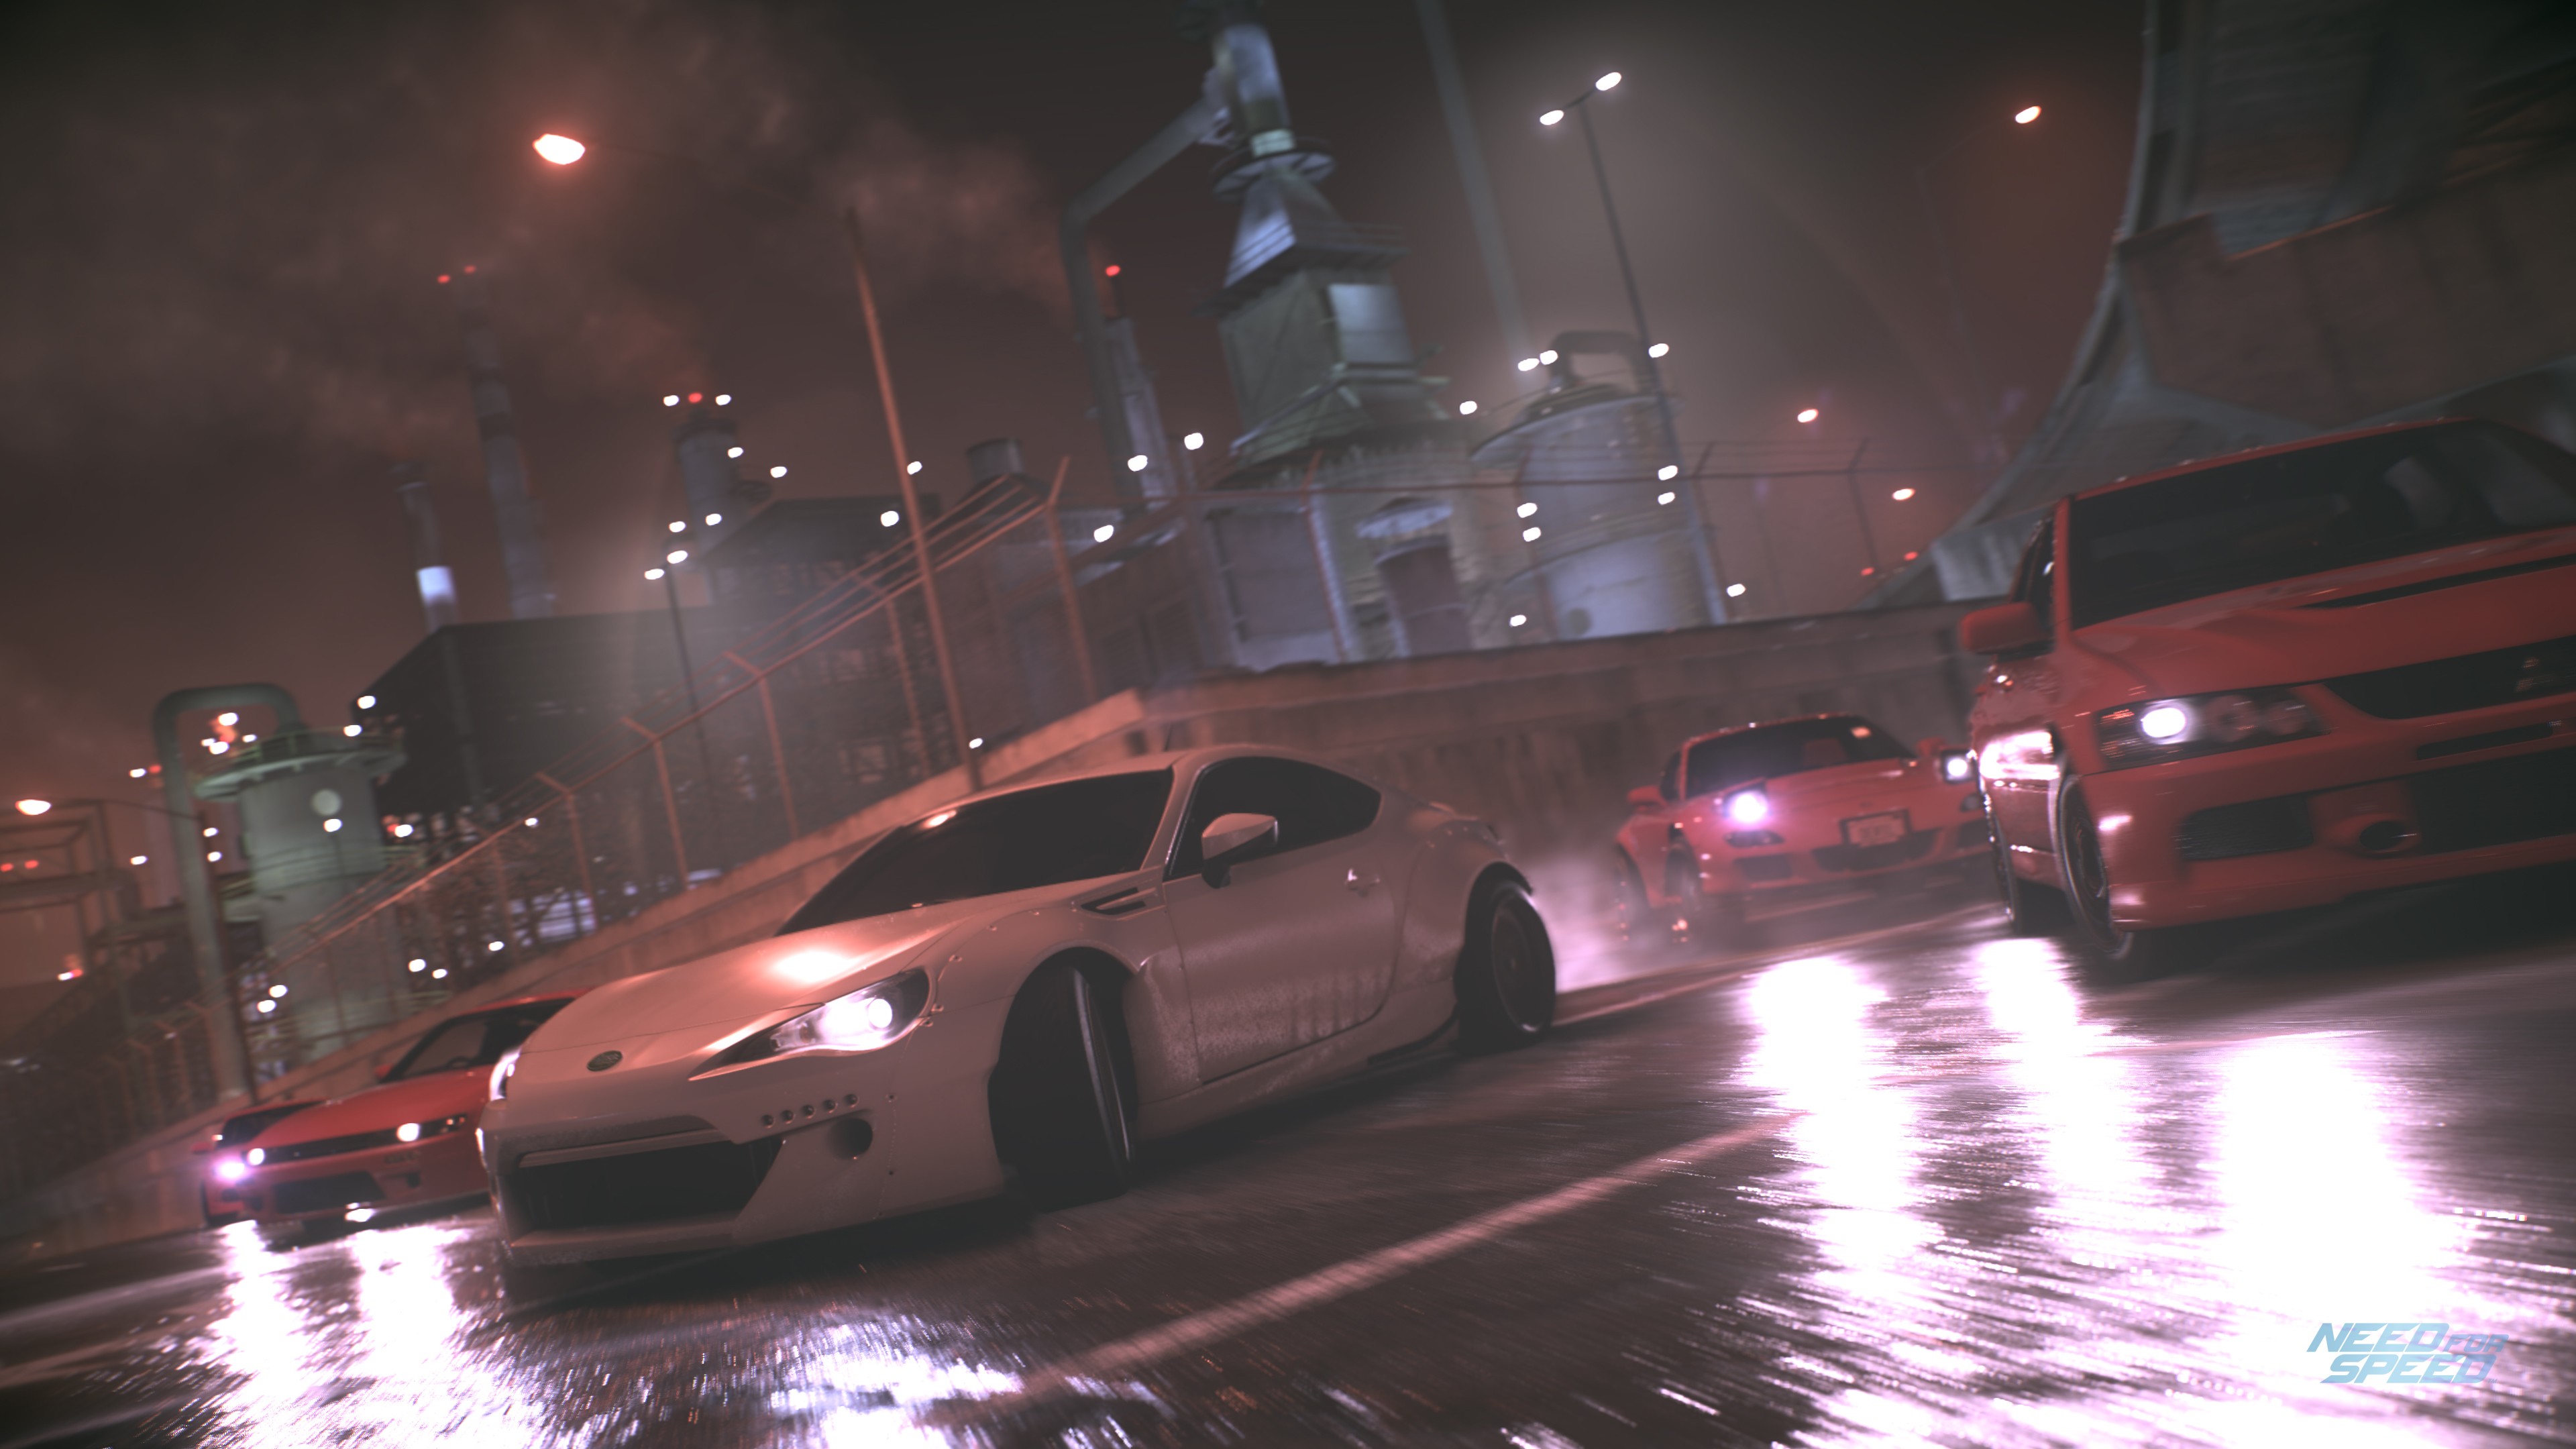 Игра ночные гонки. NFS 2015 Gameplay. Need for Speed 2015. Need for Speed 2015 Трэвис. NFS 2015 Risky Devil.